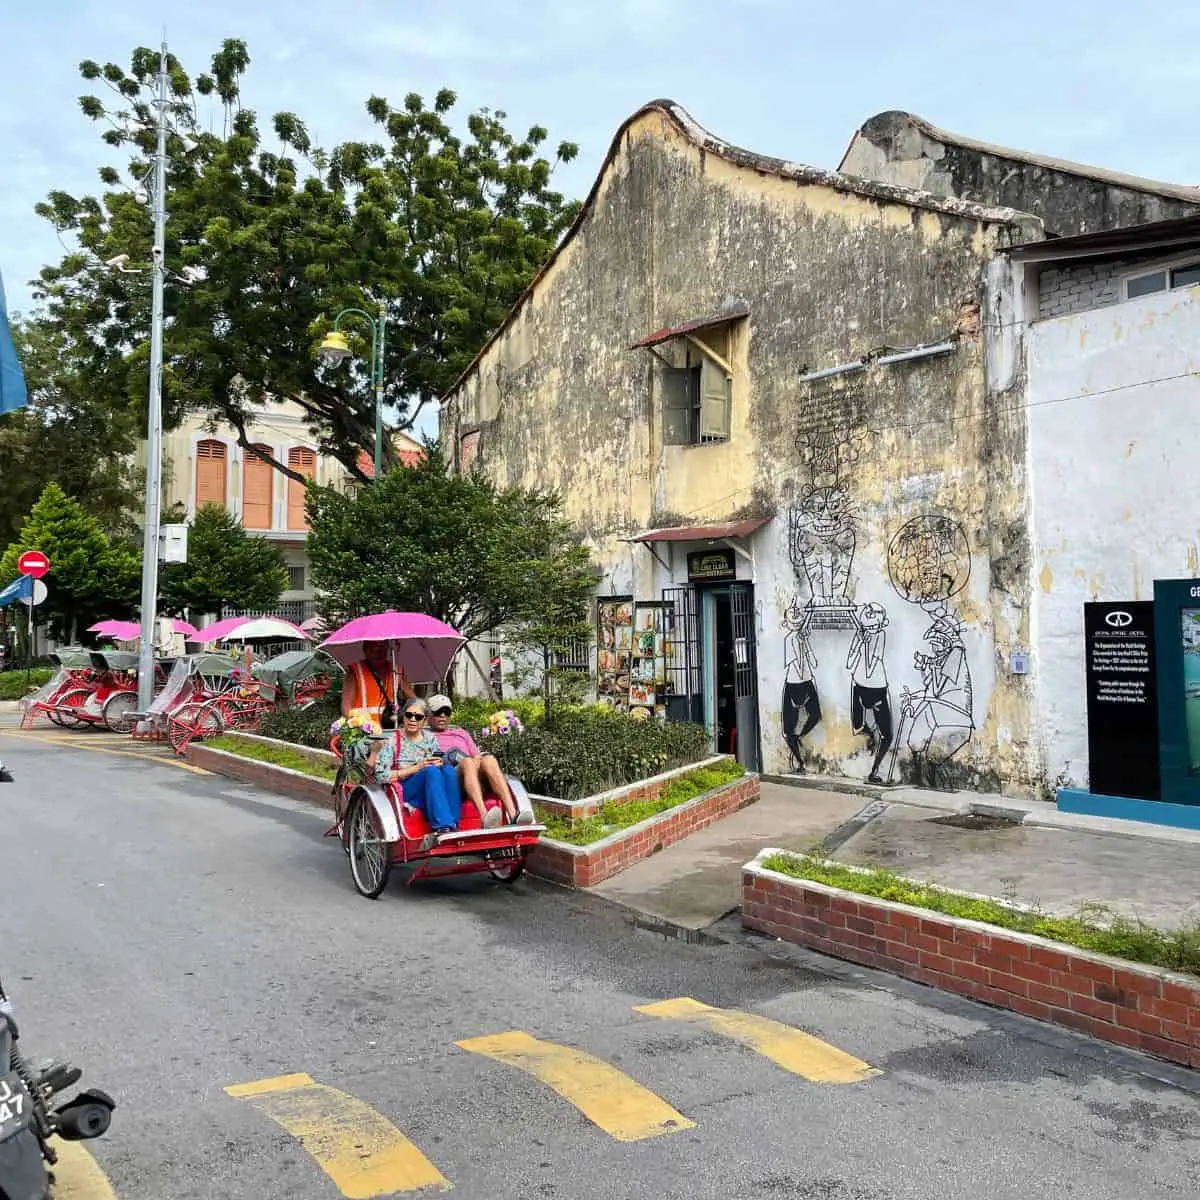 Trishaw ride to while seeing street art in best area to stay in George town Penang